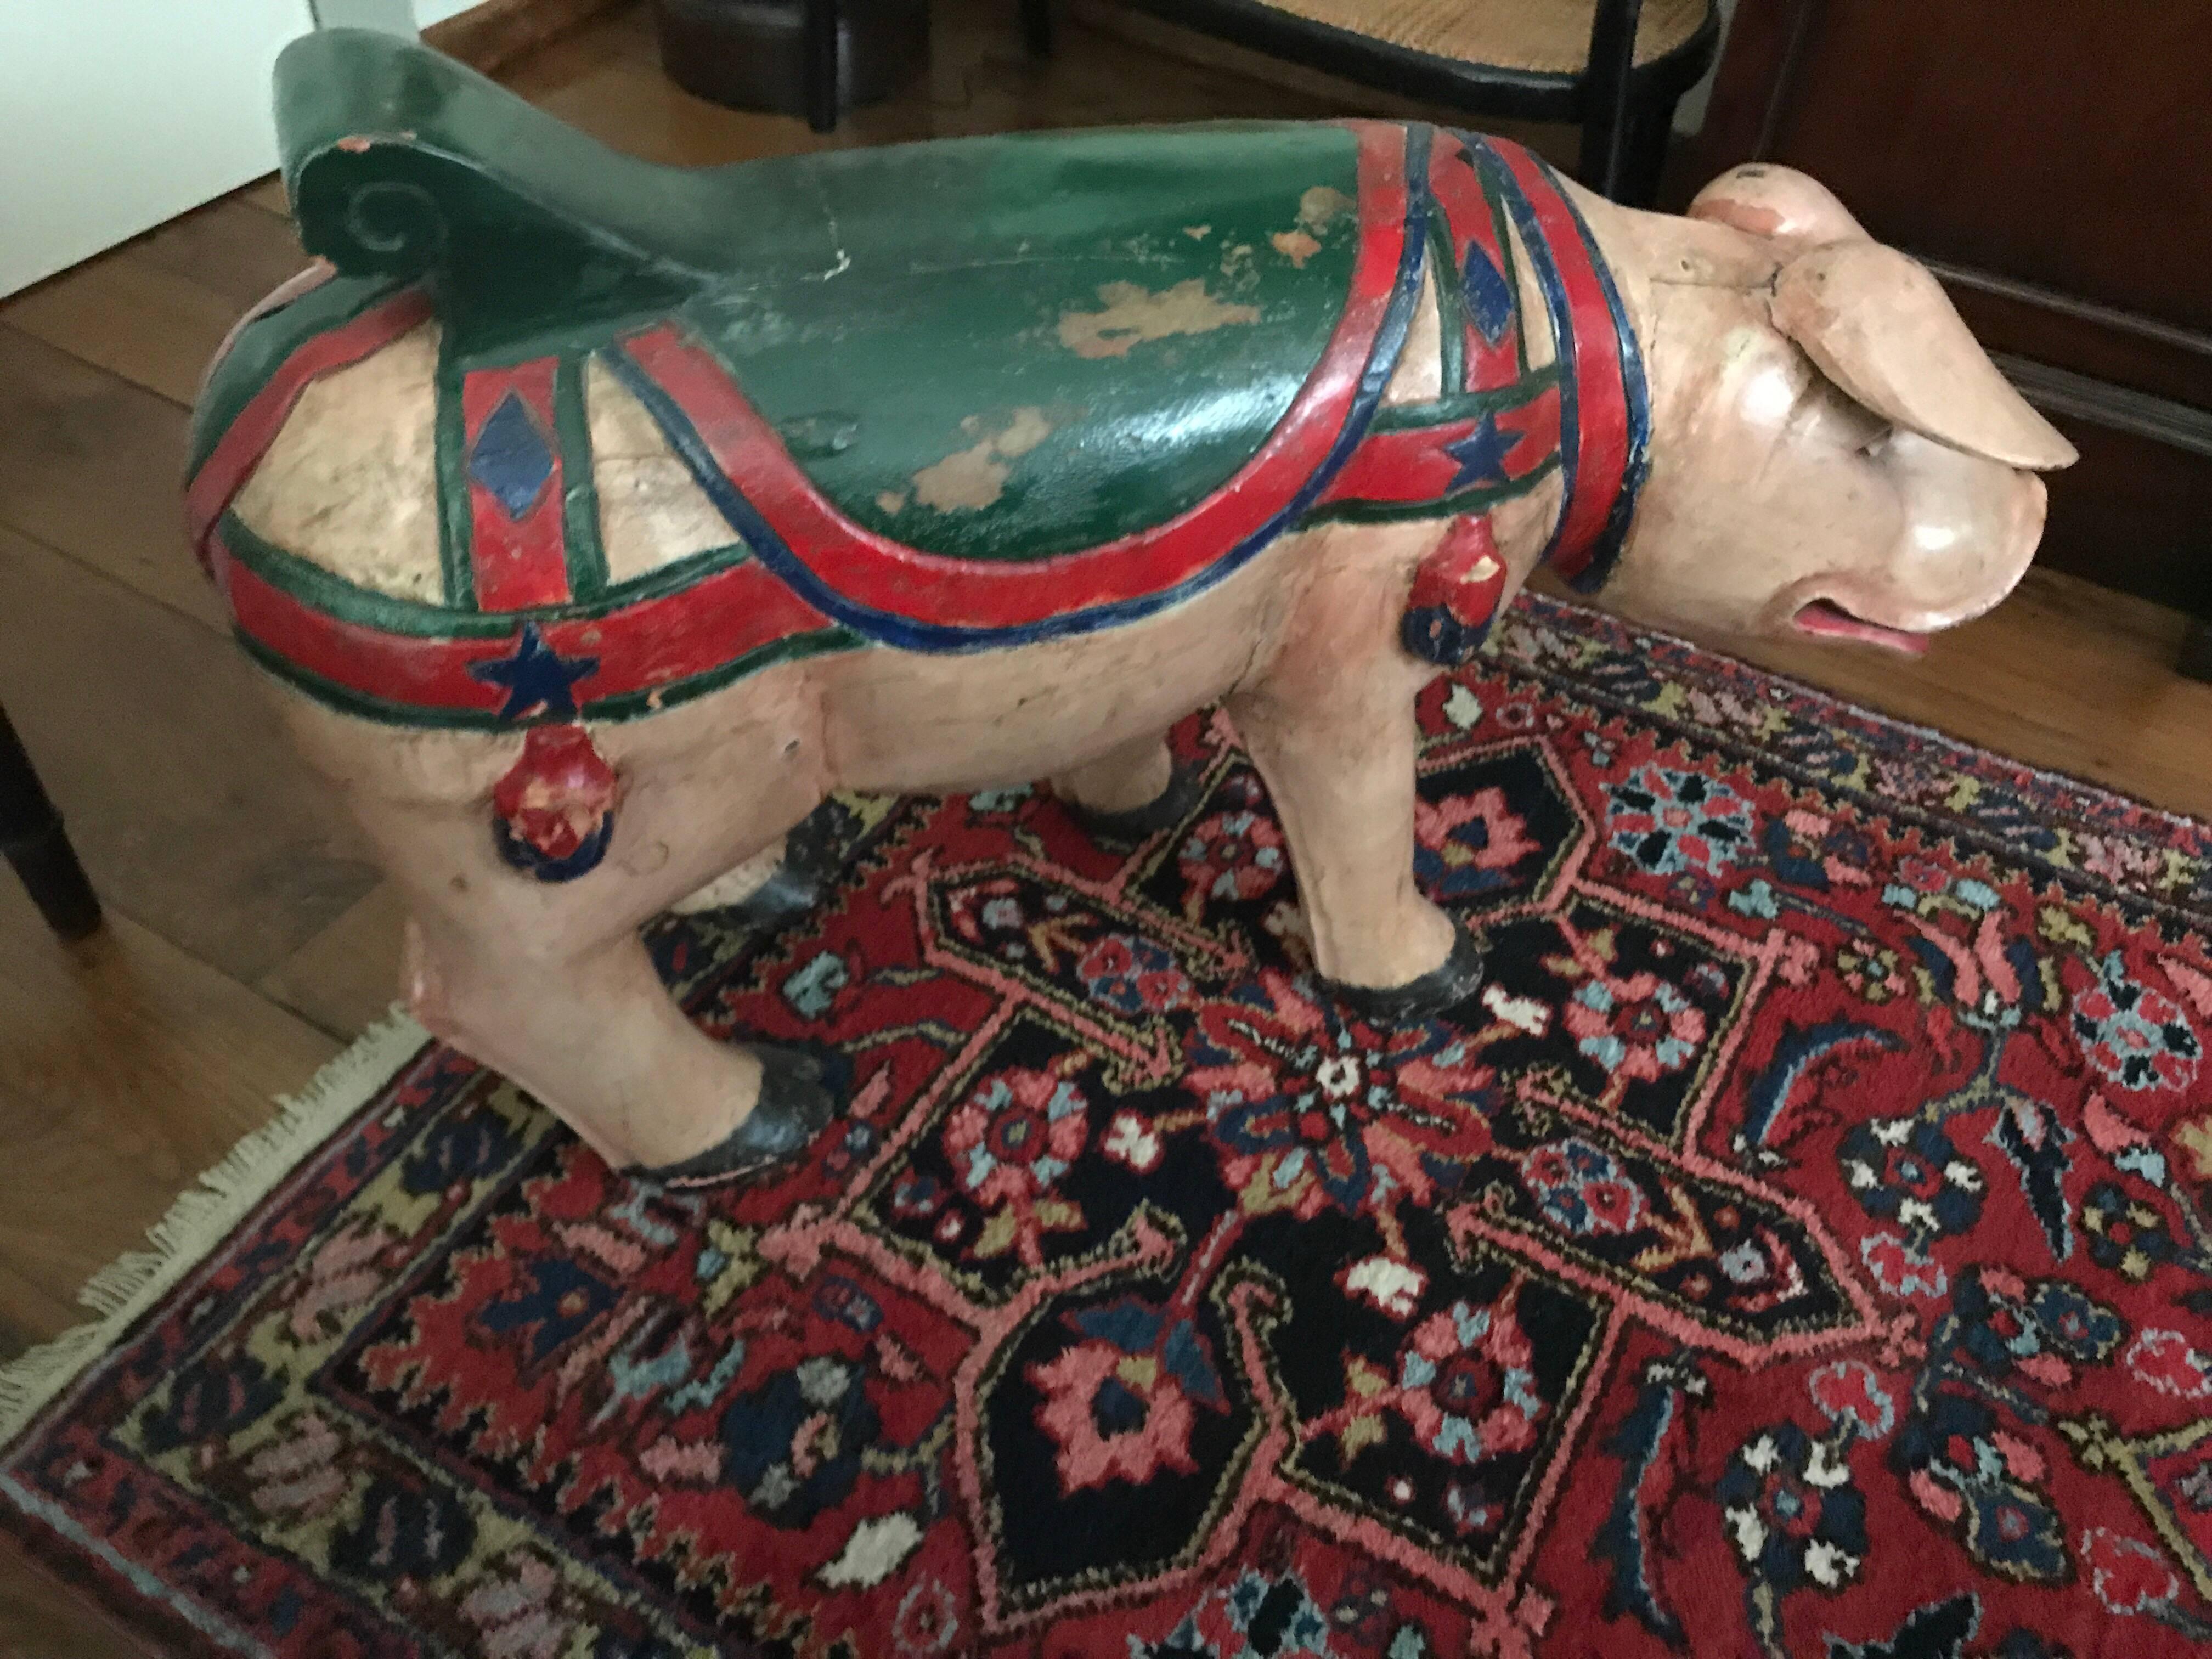 This is the second off a pair of fairmill pigs
Hand-carved
Hand-painted
circa 1900

Very rare to find even in Europe
Totally original.
 